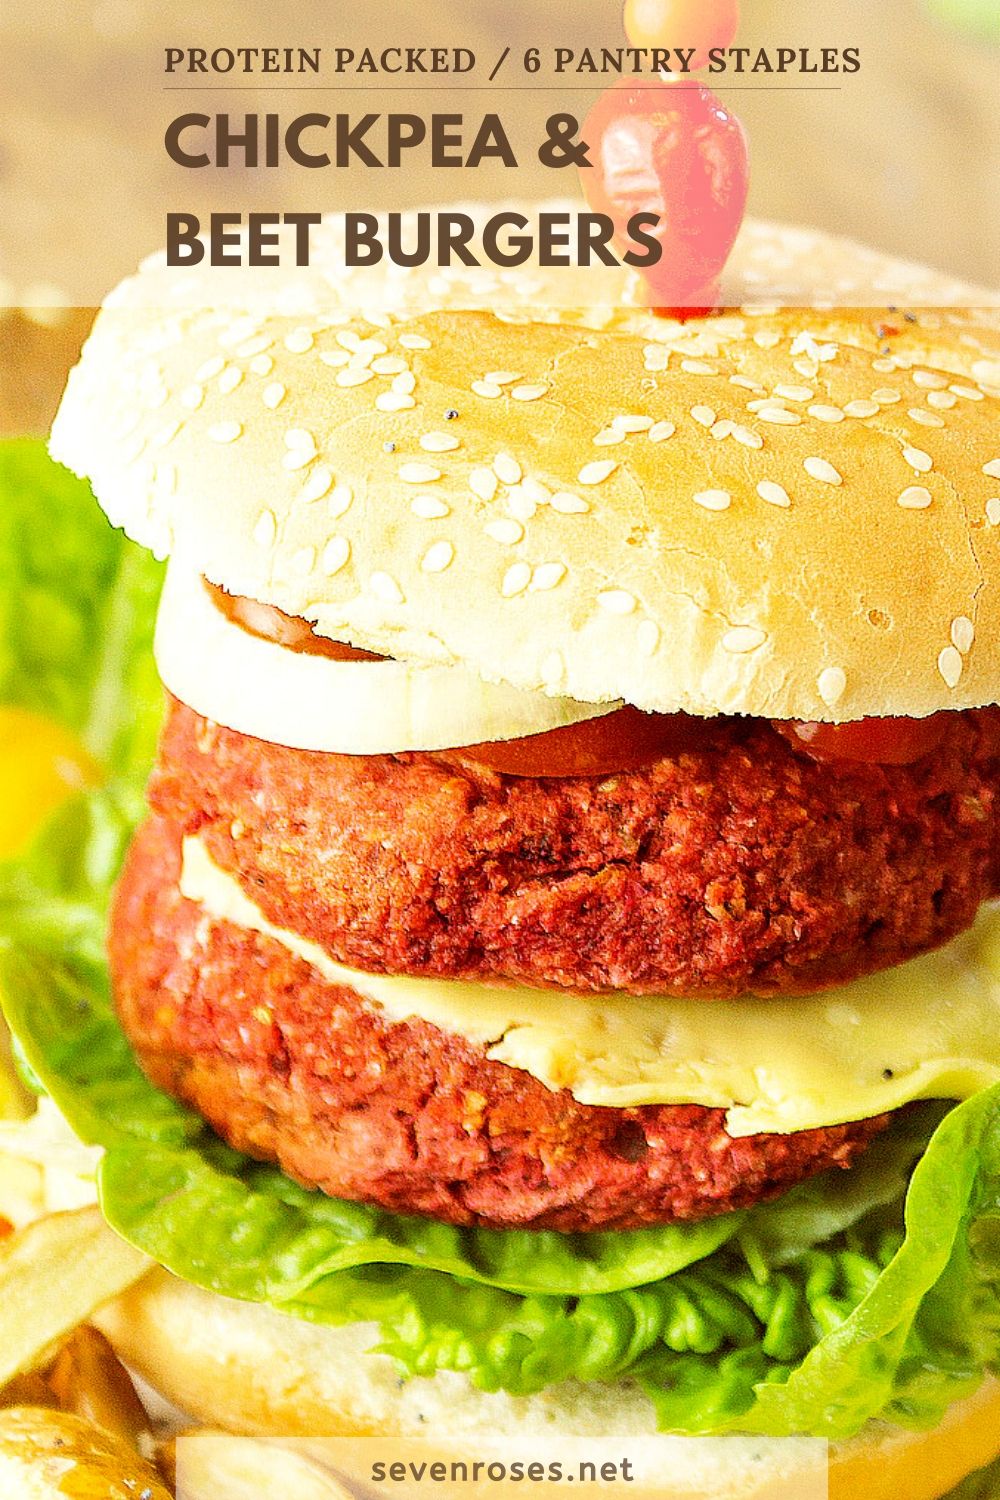 These protein-packed, pantry staple chickpea and beet burgers require only 6 ingredients from your pantry for a fun burger night at home, even during a lock down!